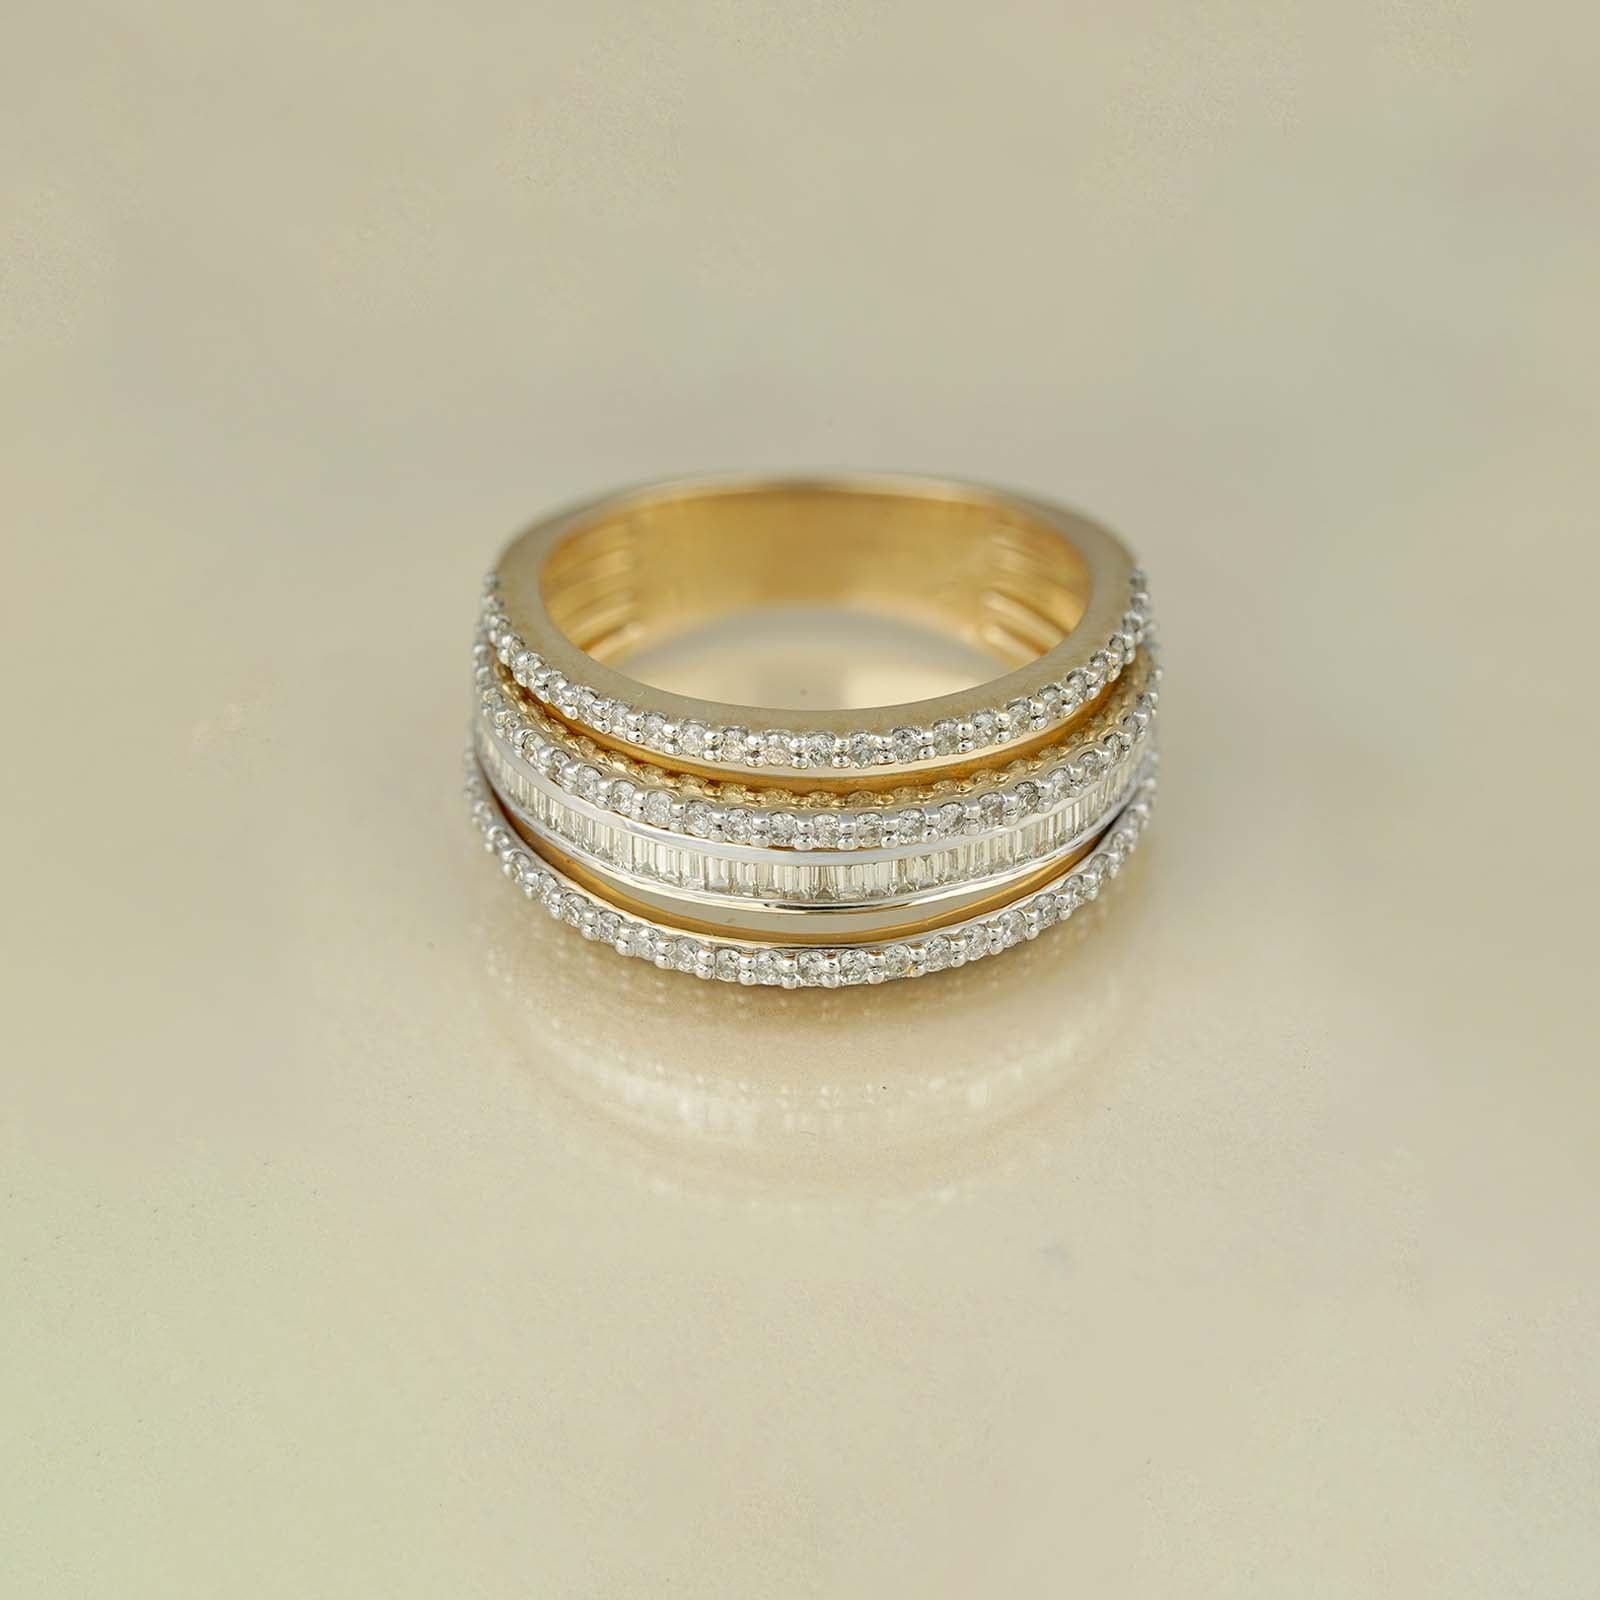 For Sale:  Moi Bridget gold and diamond ring 4